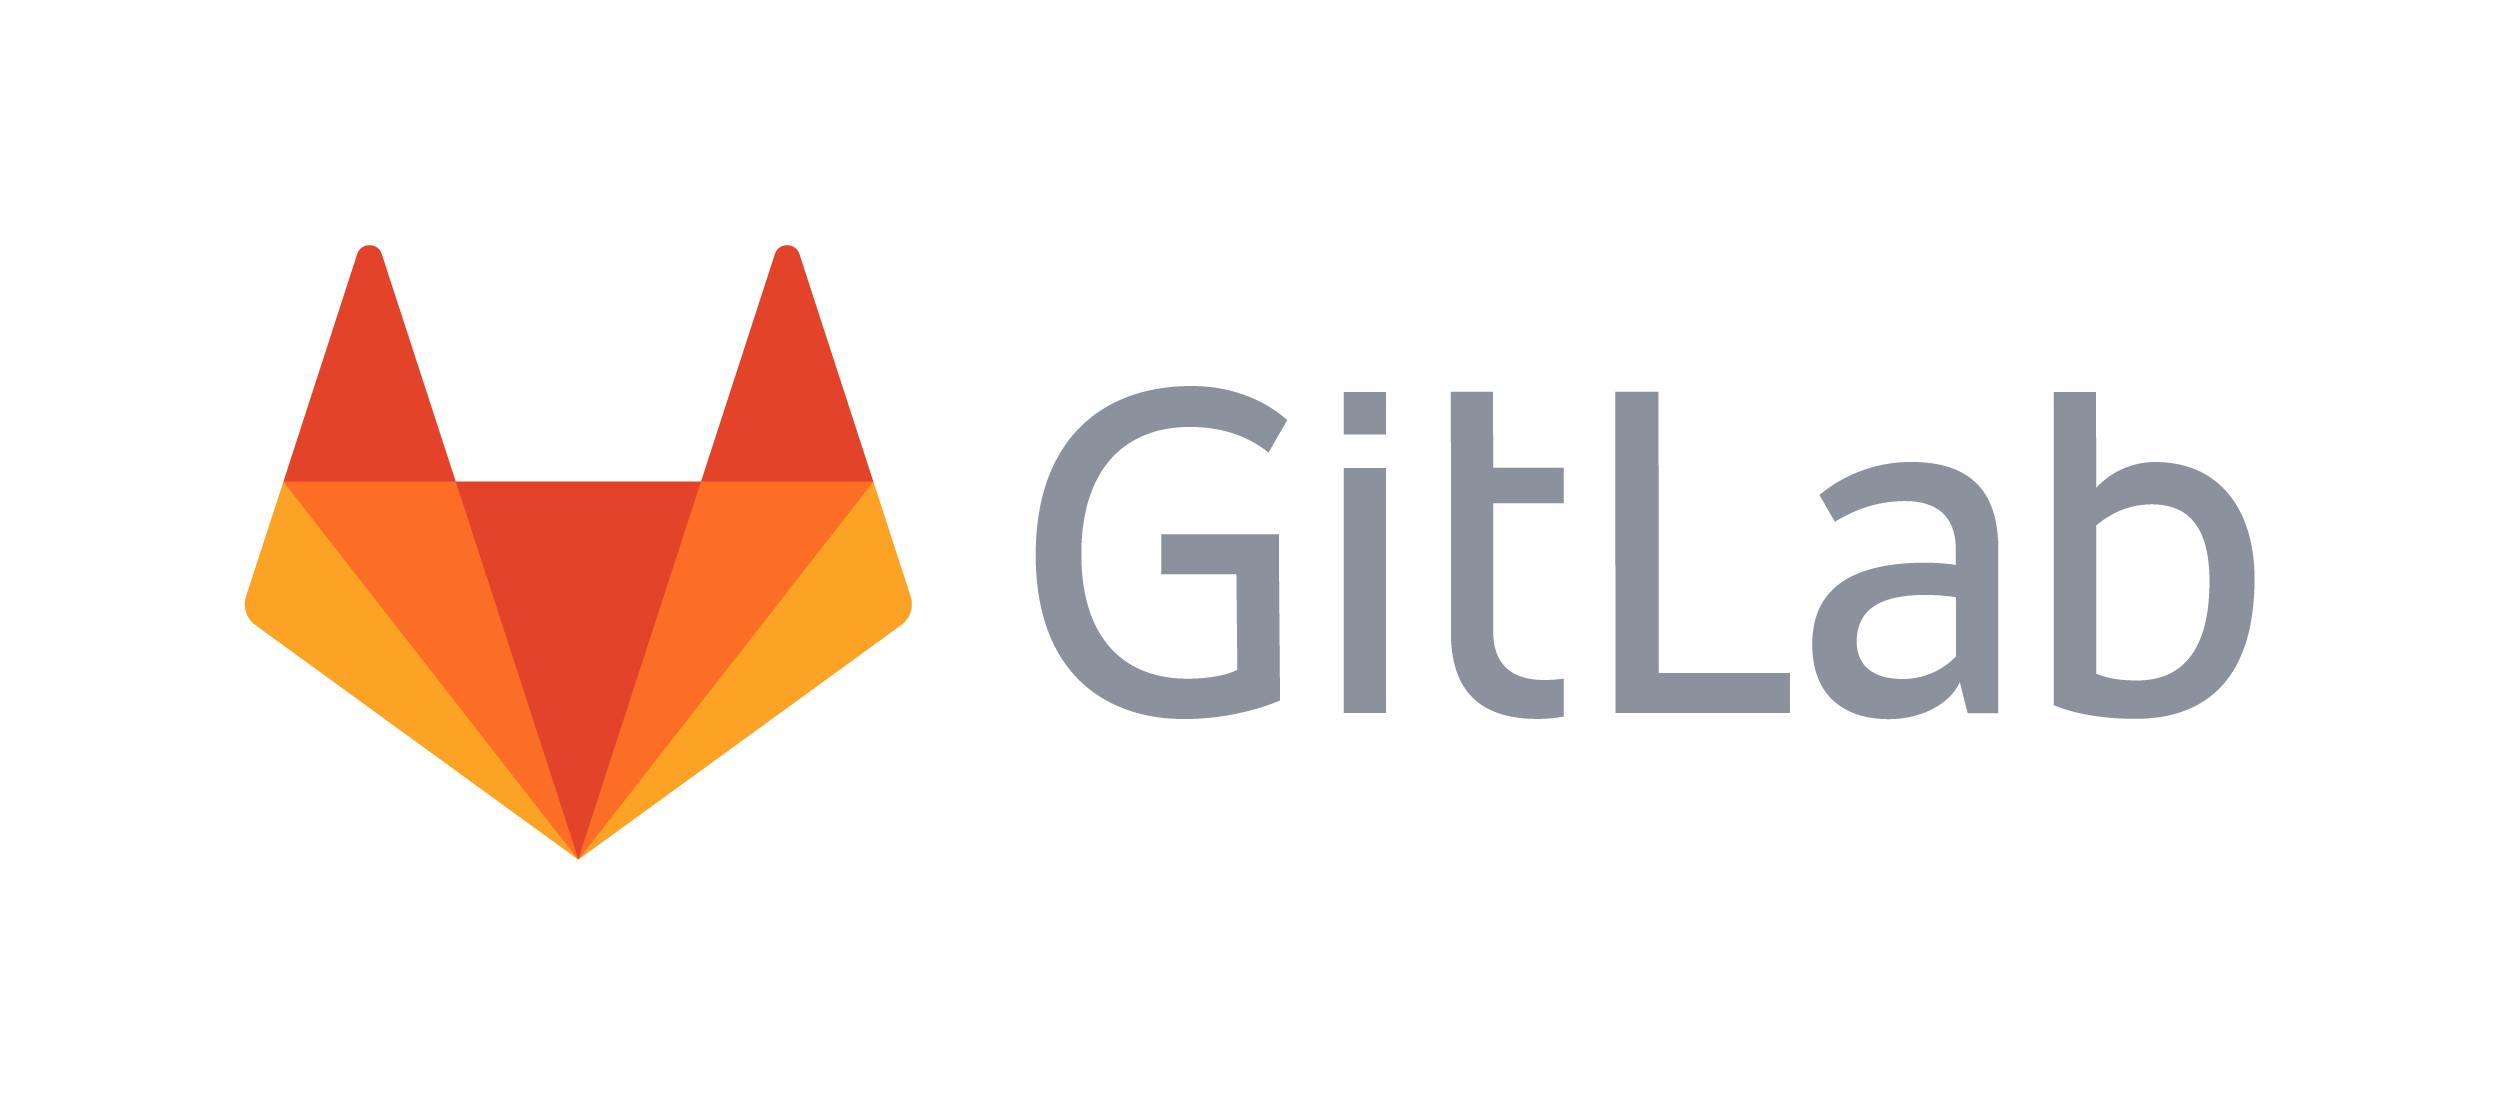 These Analysts Revise Price Targets On GitLab Following Q3 Results